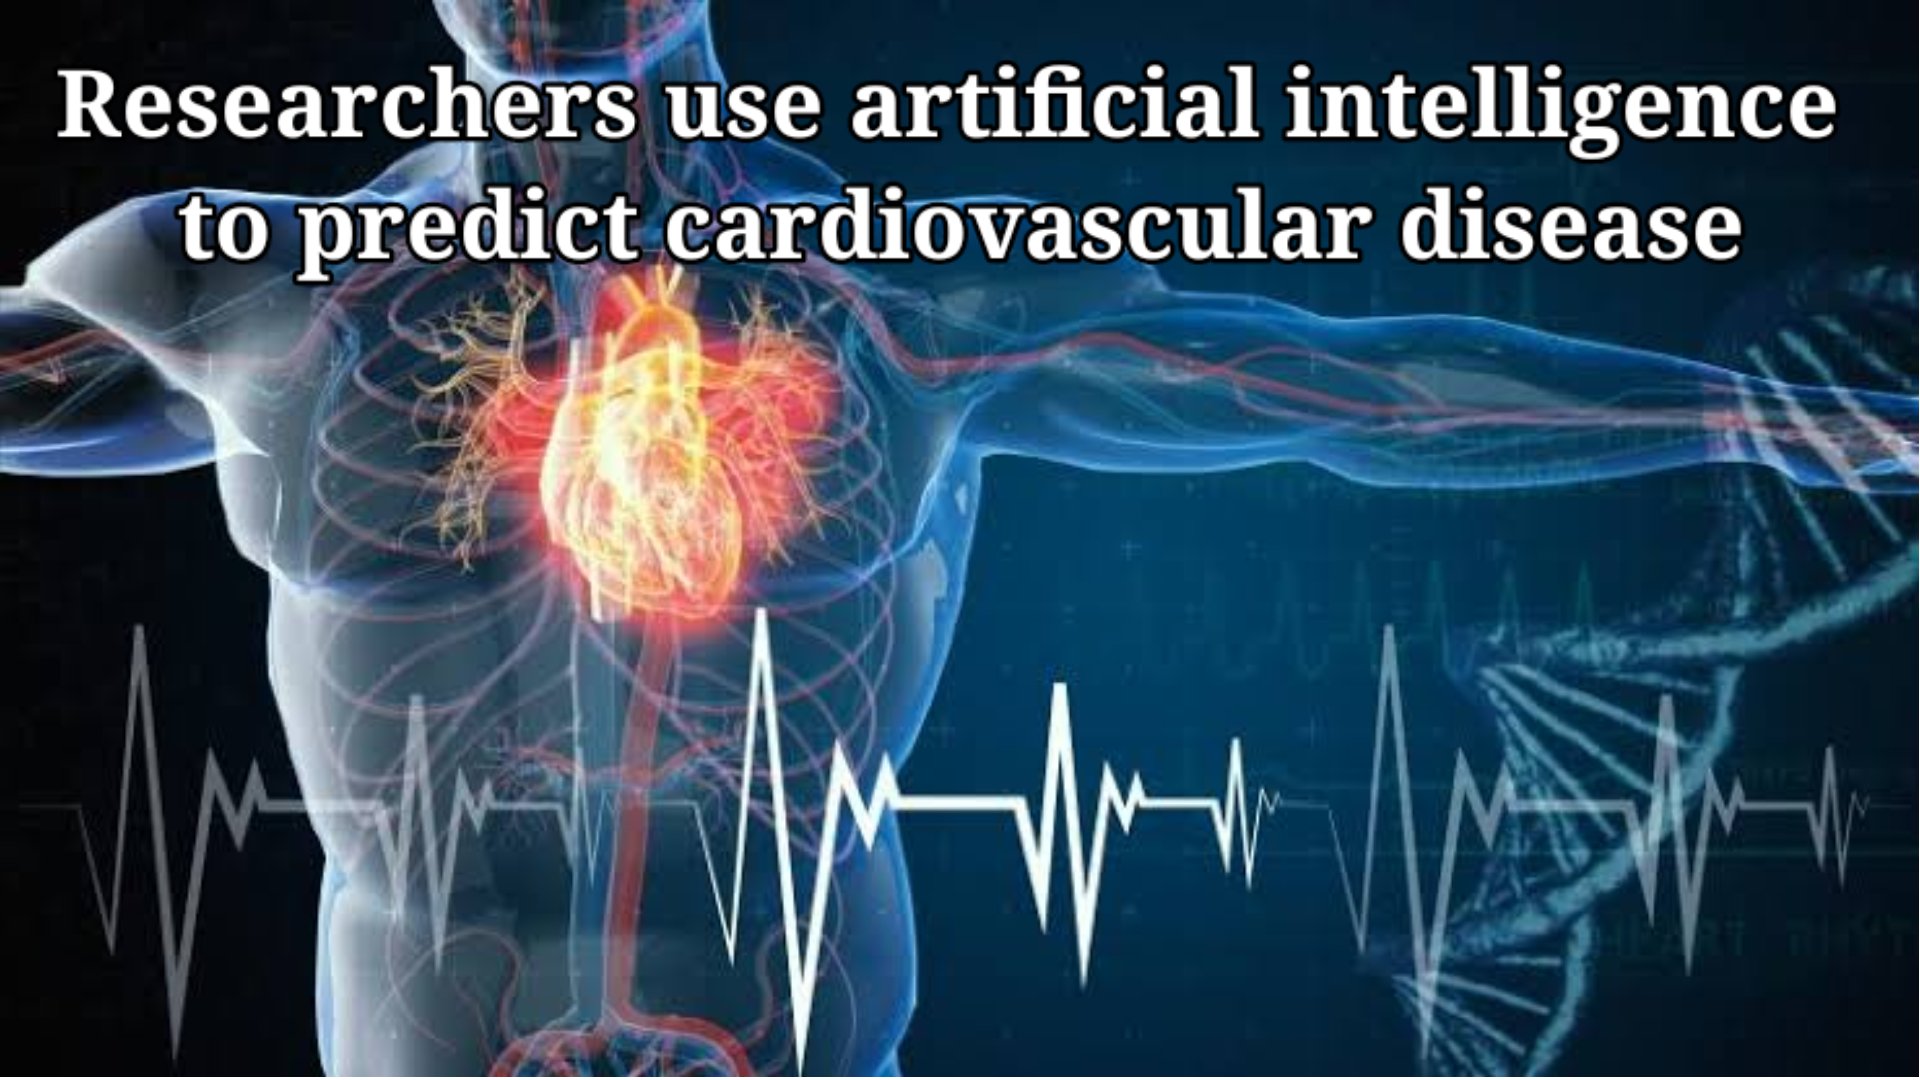 Rutgers University: Researchers of use artificial intelligence to predict cardiovascular disease